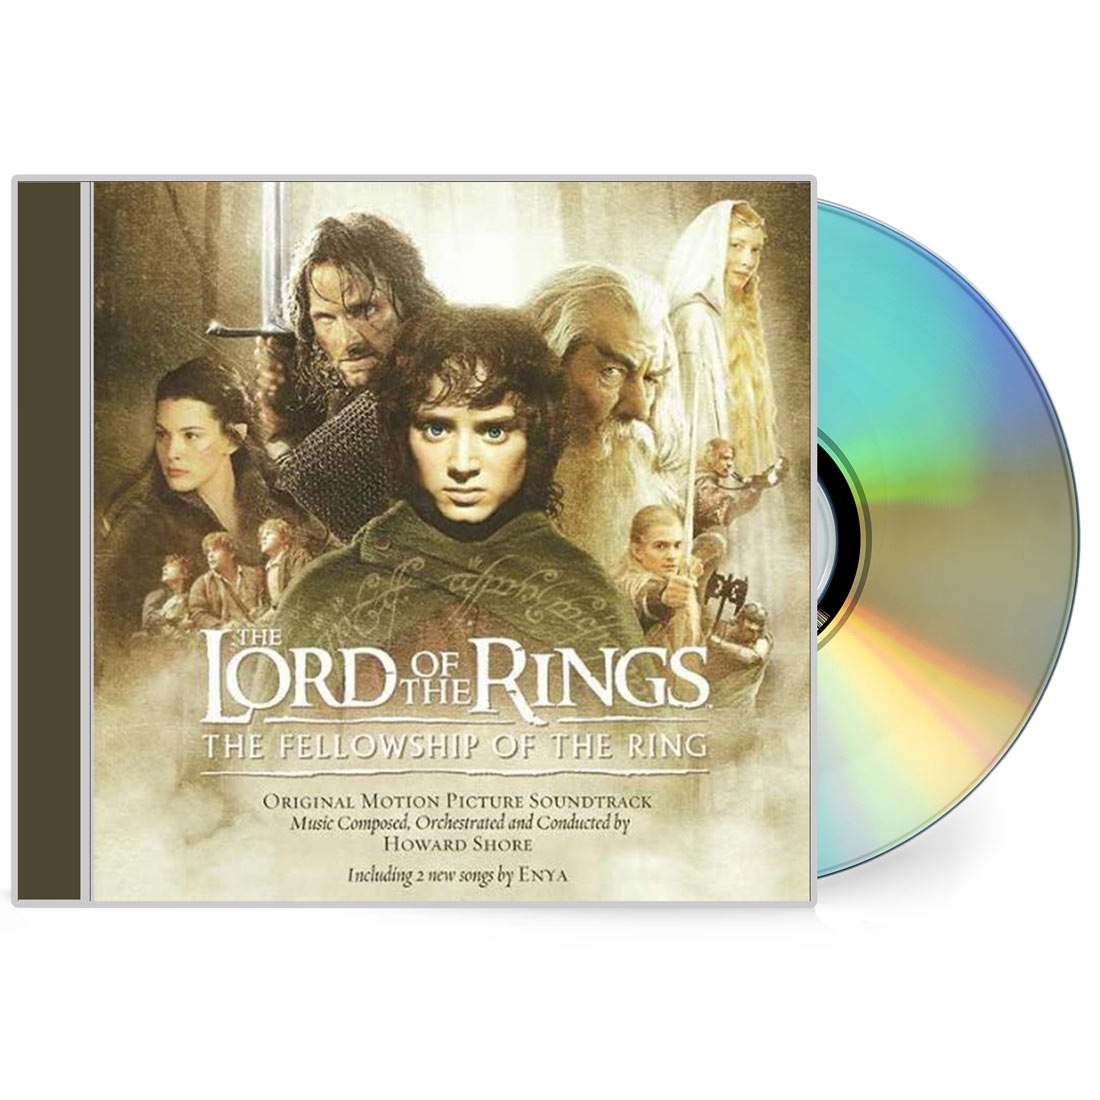 The Lord of the Rings soundtrack: all you need to know about